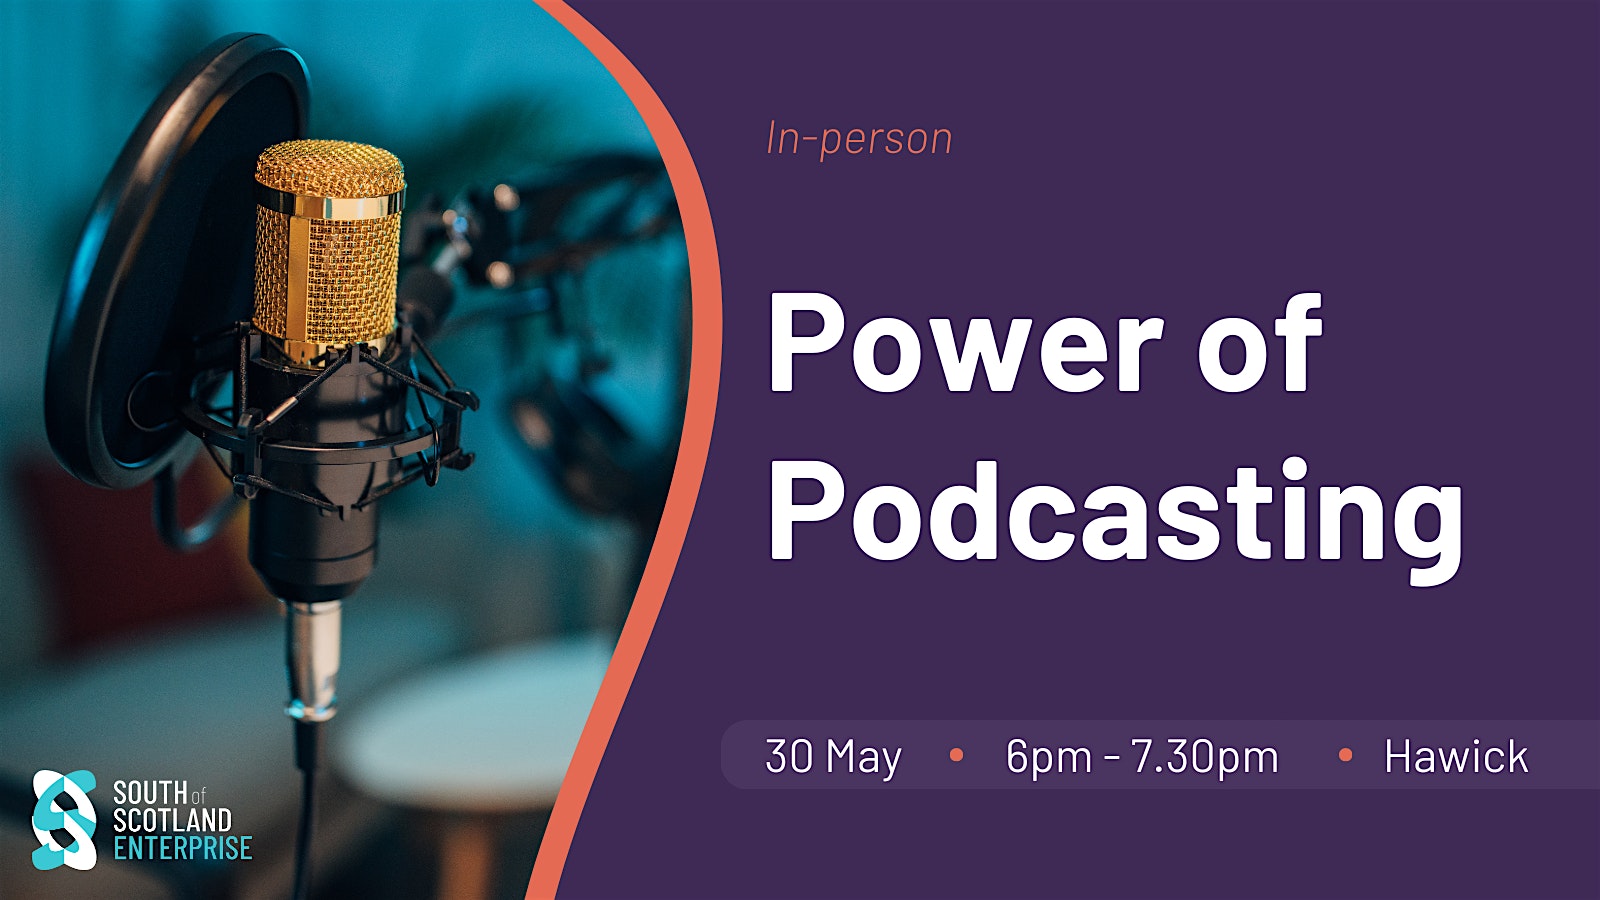 Power of Podcasting image